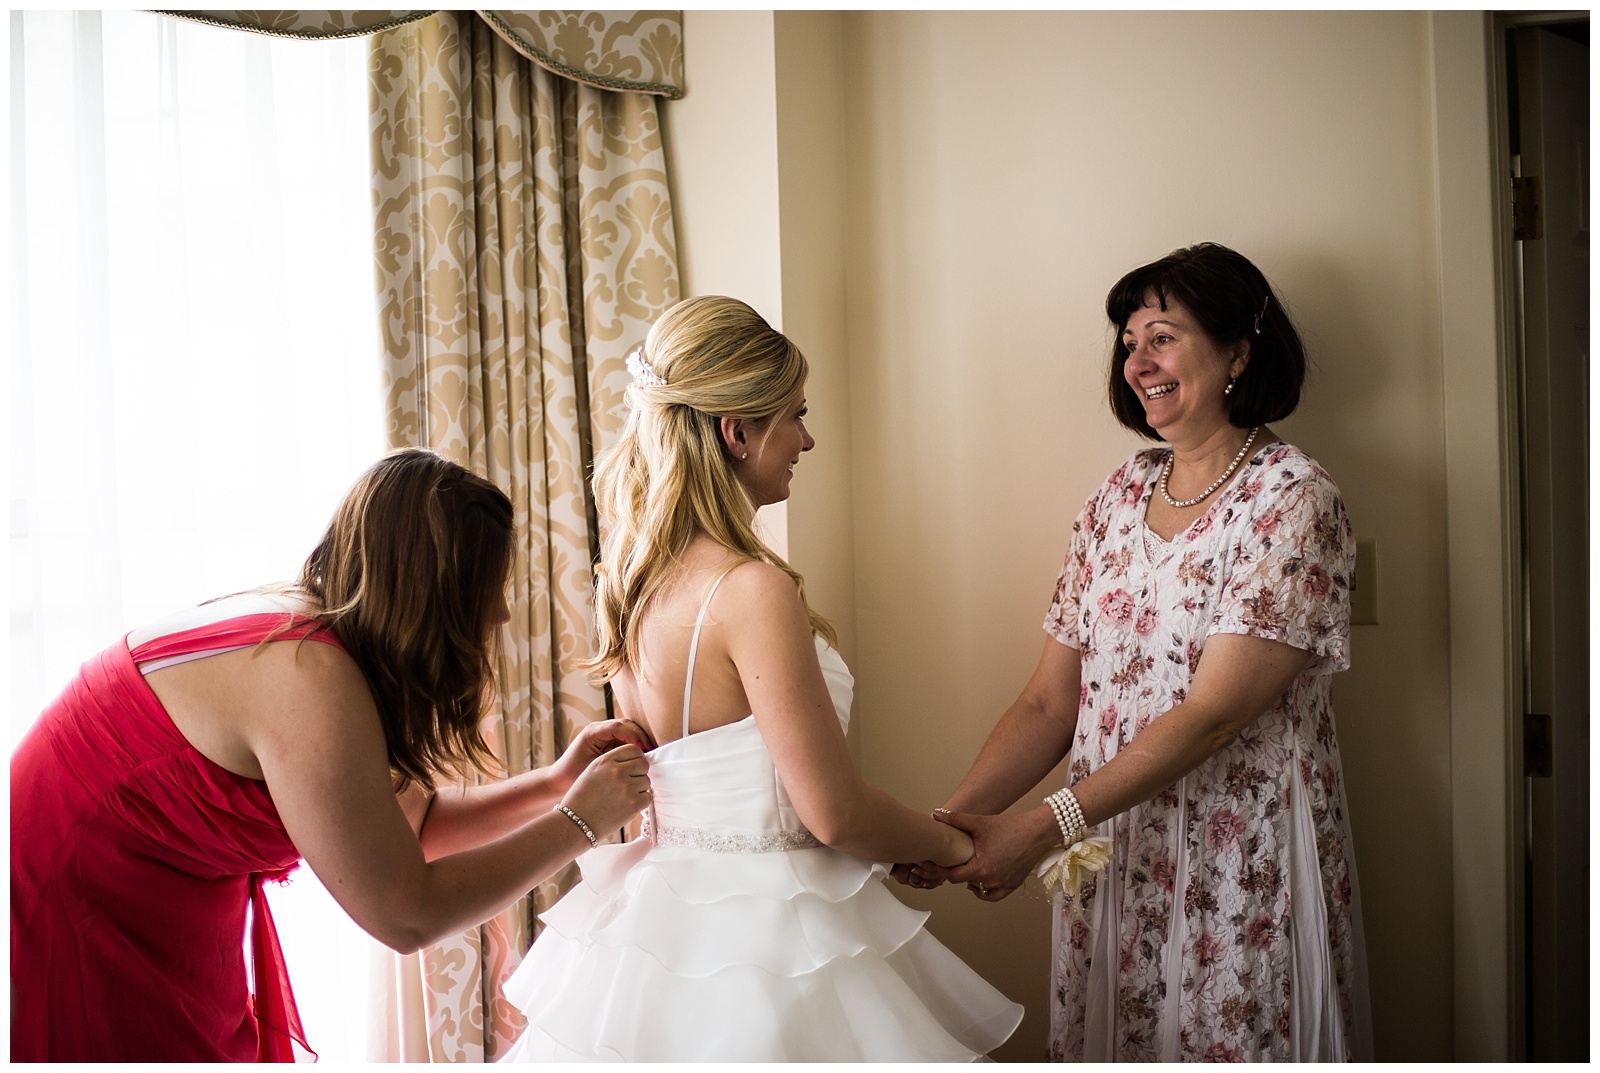 Wedding photography at The Elms in Excelsior Springs, Missouri.